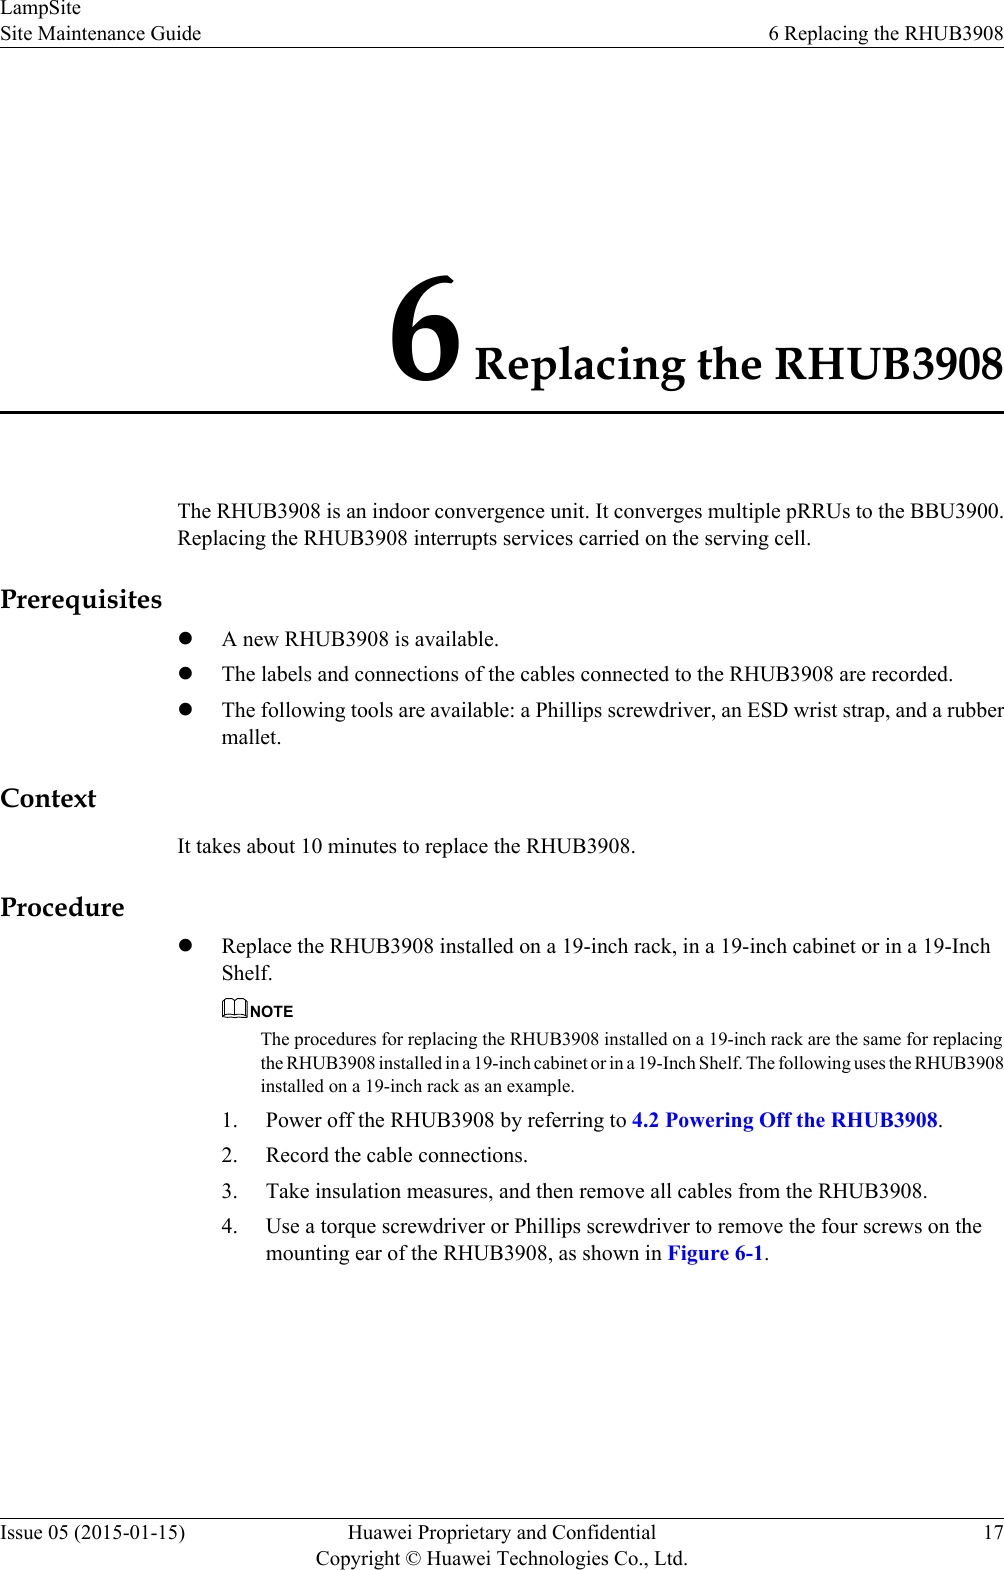 6 Replacing the RHUB3908The RHUB3908 is an indoor convergence unit. It converges multiple pRRUs to the BBU3900.Replacing the RHUB3908 interrupts services carried on the serving cell.PrerequisiteslA new RHUB3908 is available.lThe labels and connections of the cables connected to the RHUB3908 are recorded.lThe following tools are available: a Phillips screwdriver, an ESD wrist strap, and a rubbermallet.ContextIt takes about 10 minutes to replace the RHUB3908.ProcedurelReplace the RHUB3908 installed on a 19-inch rack, in a 19-inch cabinet or in a 19-InchShelf.NOTEThe procedures for replacing the RHUB3908 installed on a 19-inch rack are the same for replacingthe RHUB3908 installed in a 19-inch cabinet or in a 19-Inch Shelf. The following uses the RHUB3908installed on a 19-inch rack as an example.1. Power off the RHUB3908 by referring to 4.2 Powering Off the RHUB3908.2. Record the cable connections.3. Take insulation measures, and then remove all cables from the RHUB3908.4. Use a torque screwdriver or Phillips screwdriver to remove the four screws on themounting ear of the RHUB3908, as shown in Figure 6-1.LampSiteSite Maintenance Guide 6 Replacing the RHUB3908Issue 05 (2015-01-15) Huawei Proprietary and ConfidentialCopyright © Huawei Technologies Co., Ltd.17